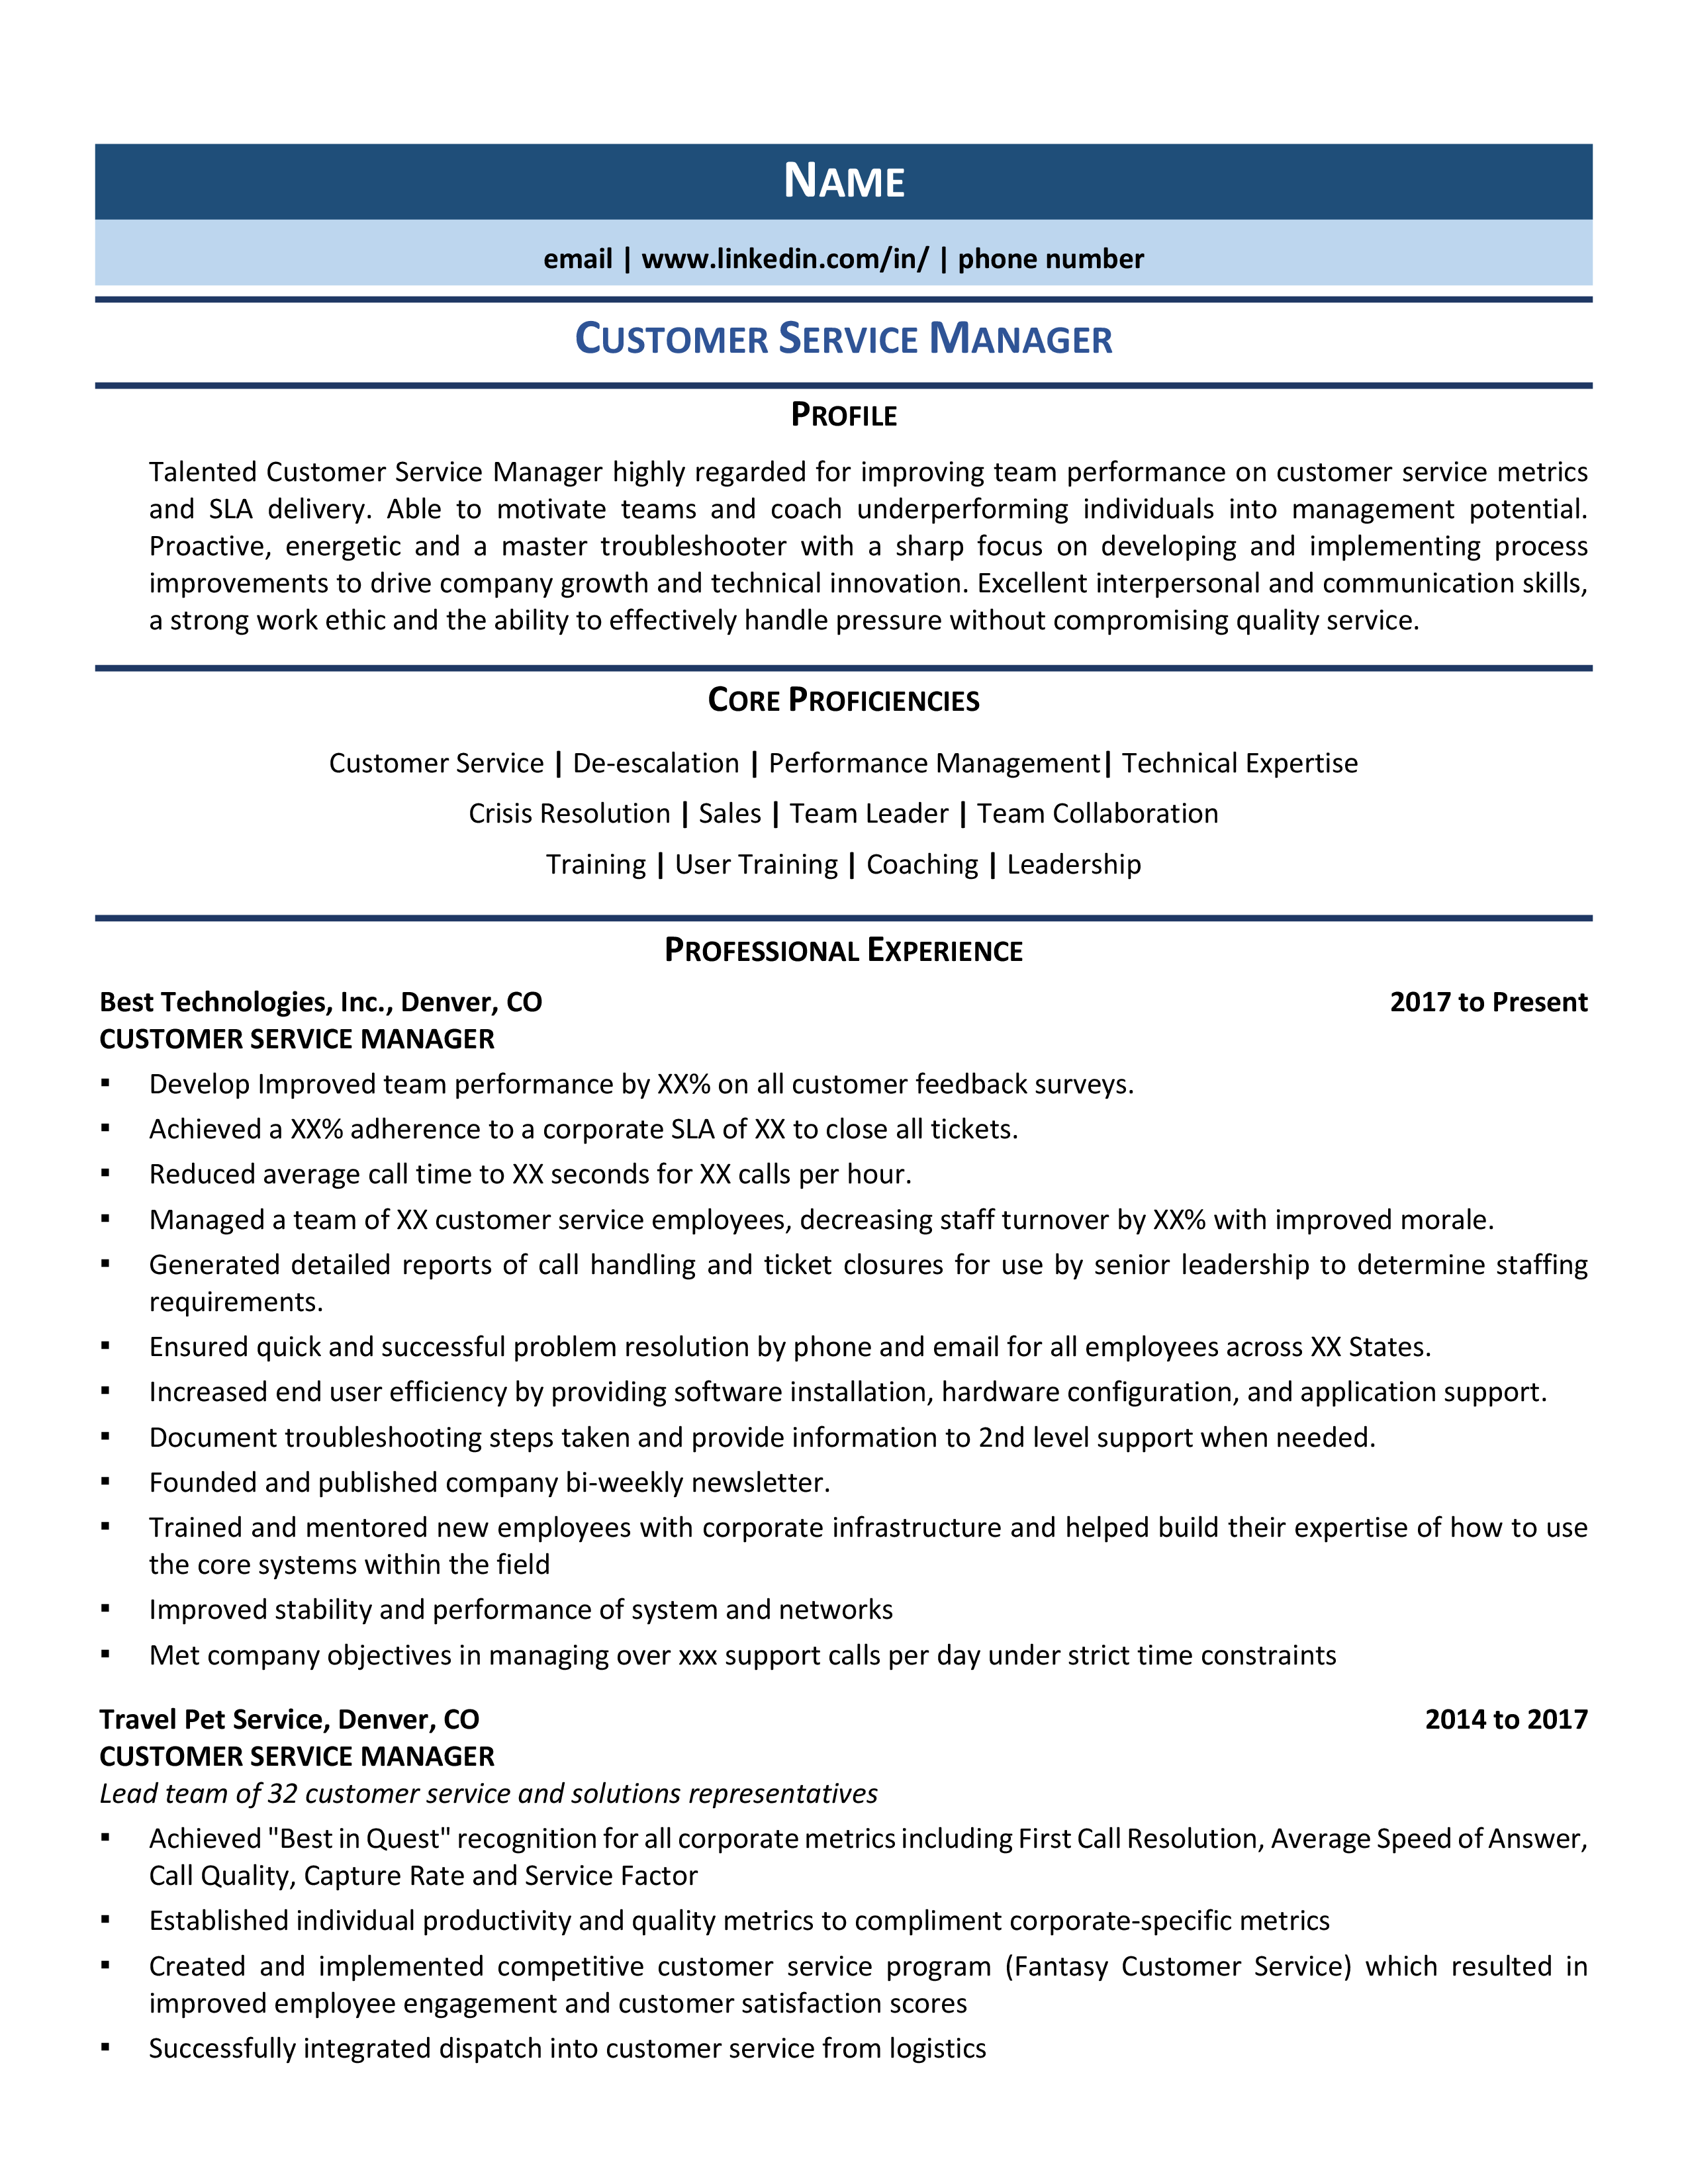 customer service experience examples for resume